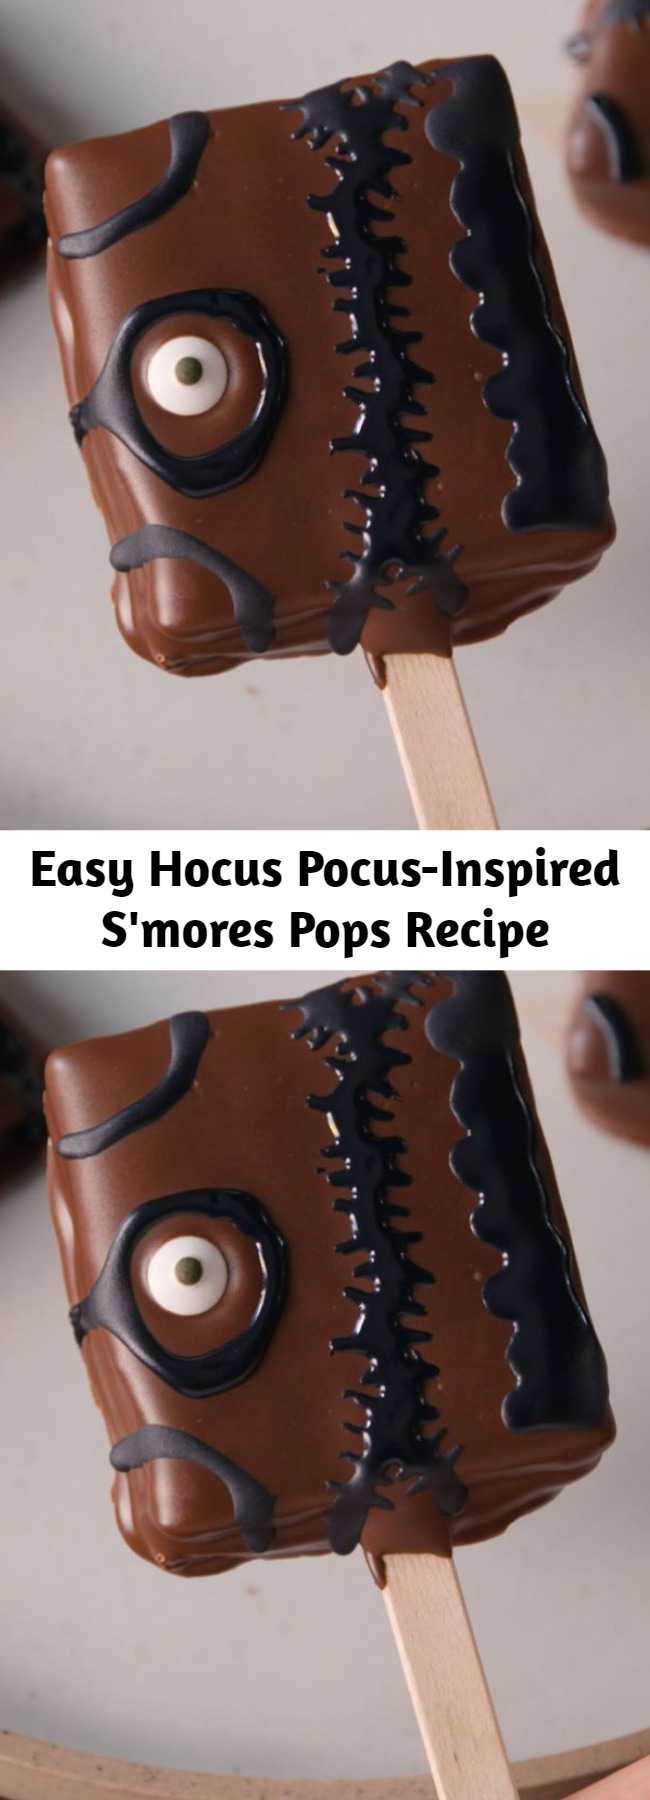 Easy Hocus Pocus-Inspired S'mores Pops Recipe - Looking for an easy Halloween dessert idea? This Hocus Pocus-Inspired S'mores Pops Recipe is the best. You'll love them even more than Bette Midler loved her booooook! (Note: You'll need popsicle sticks and candy eyes to complete the look.) #halloween #recipes #easyrecipes #diy #hocuspocus #disney #pops #hocus #pocus #smores #dessert #forparties #kids #ideas